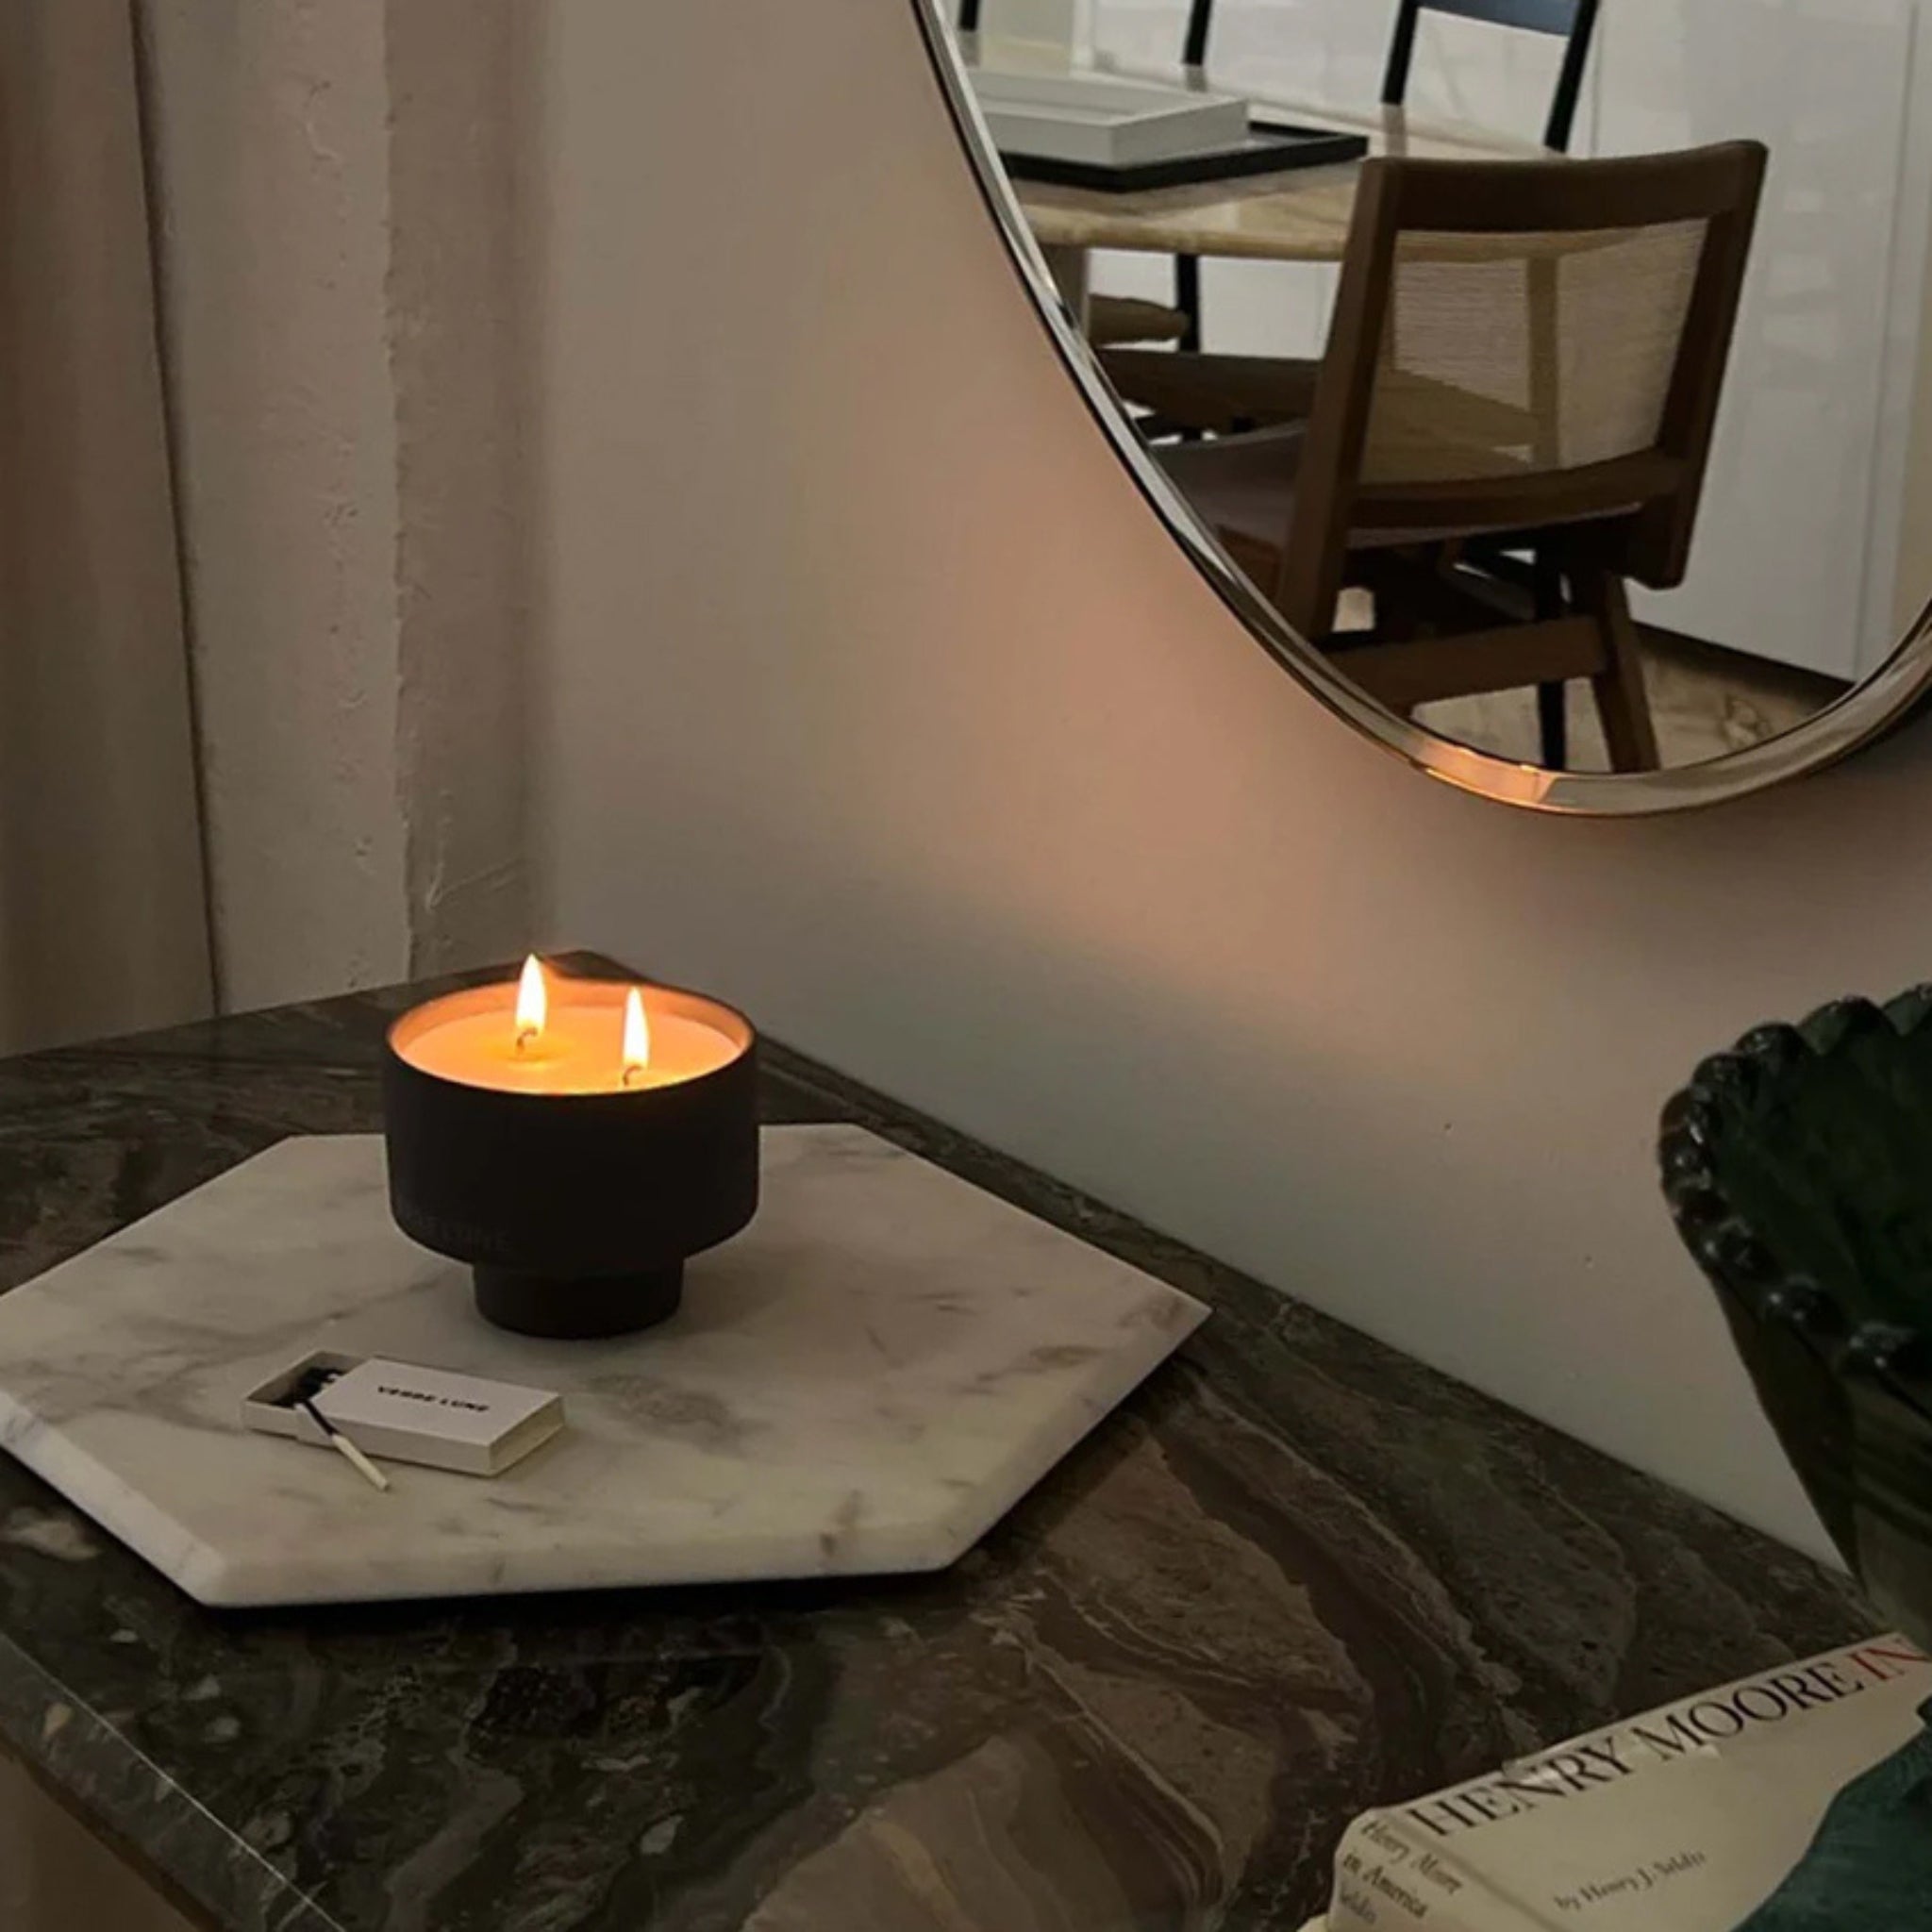 a candle lit with verre lune branded matches by its side in a modern dining room setting